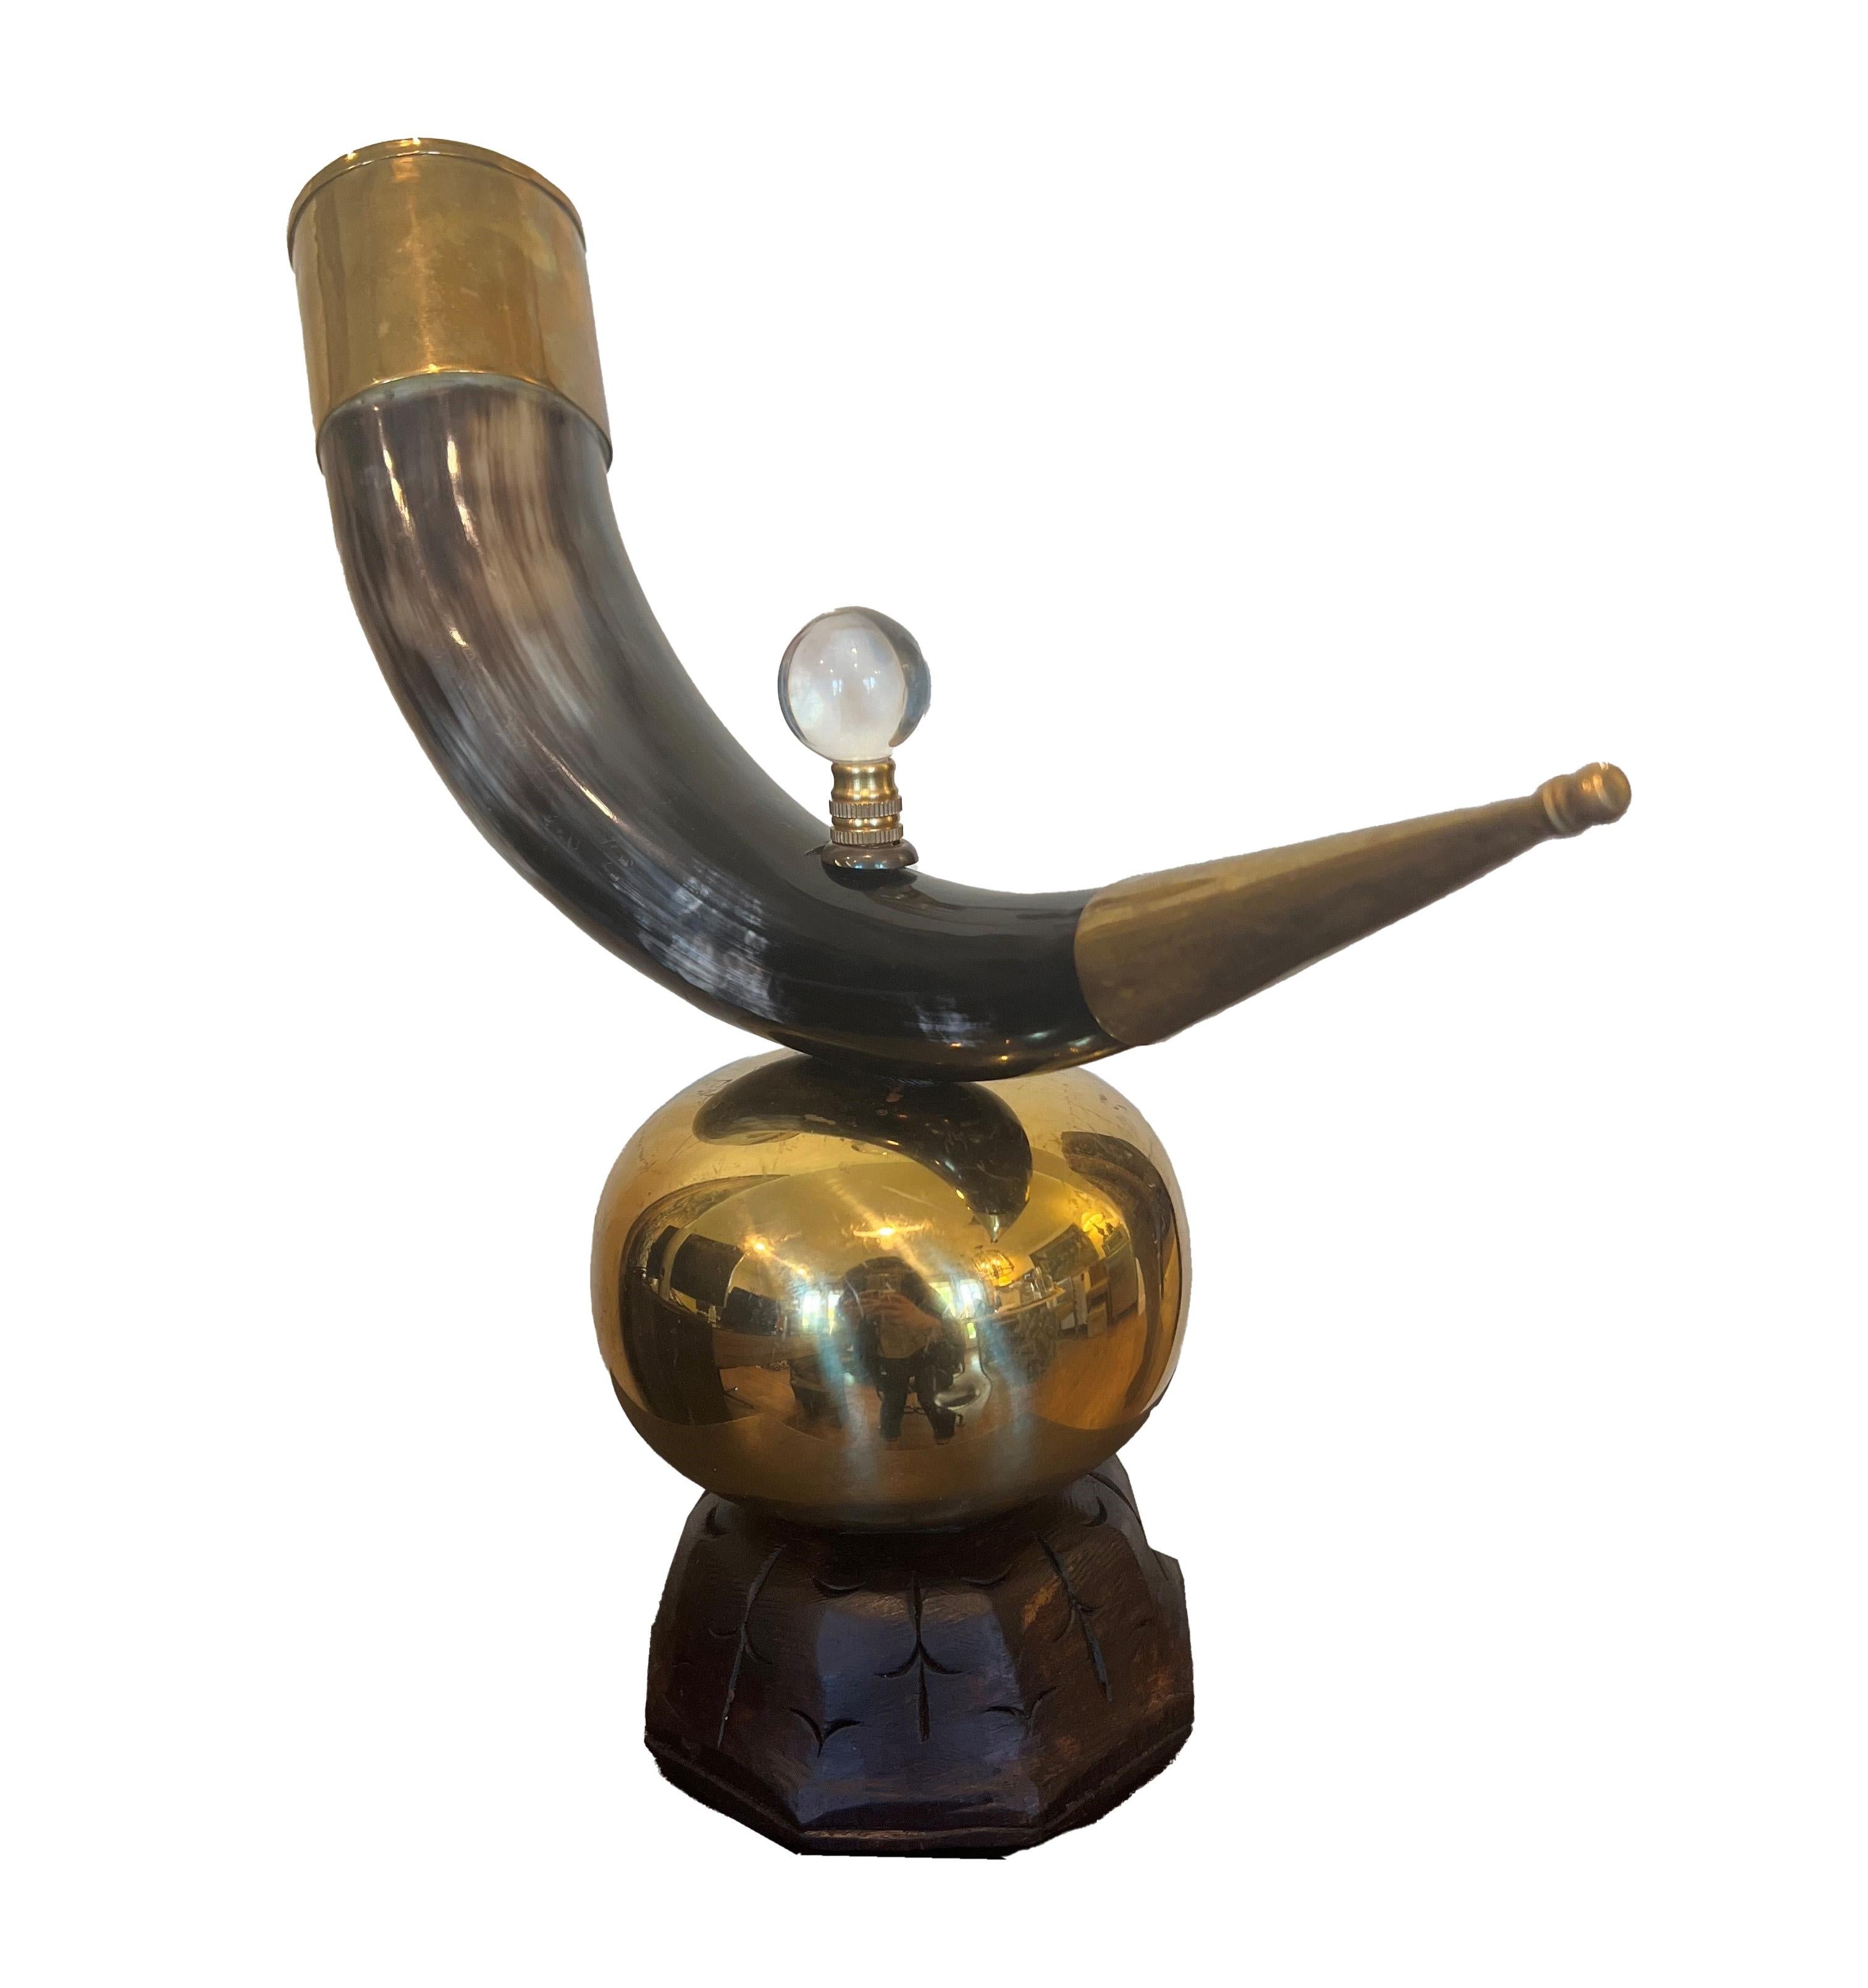 A rare antique horn, a unique and intriguing accessory that promises to elevate the sophistication of any space it graces. Mounted on an elegant brass stand that beautifully complements its natural allure, the horn boasts a patina that only time can